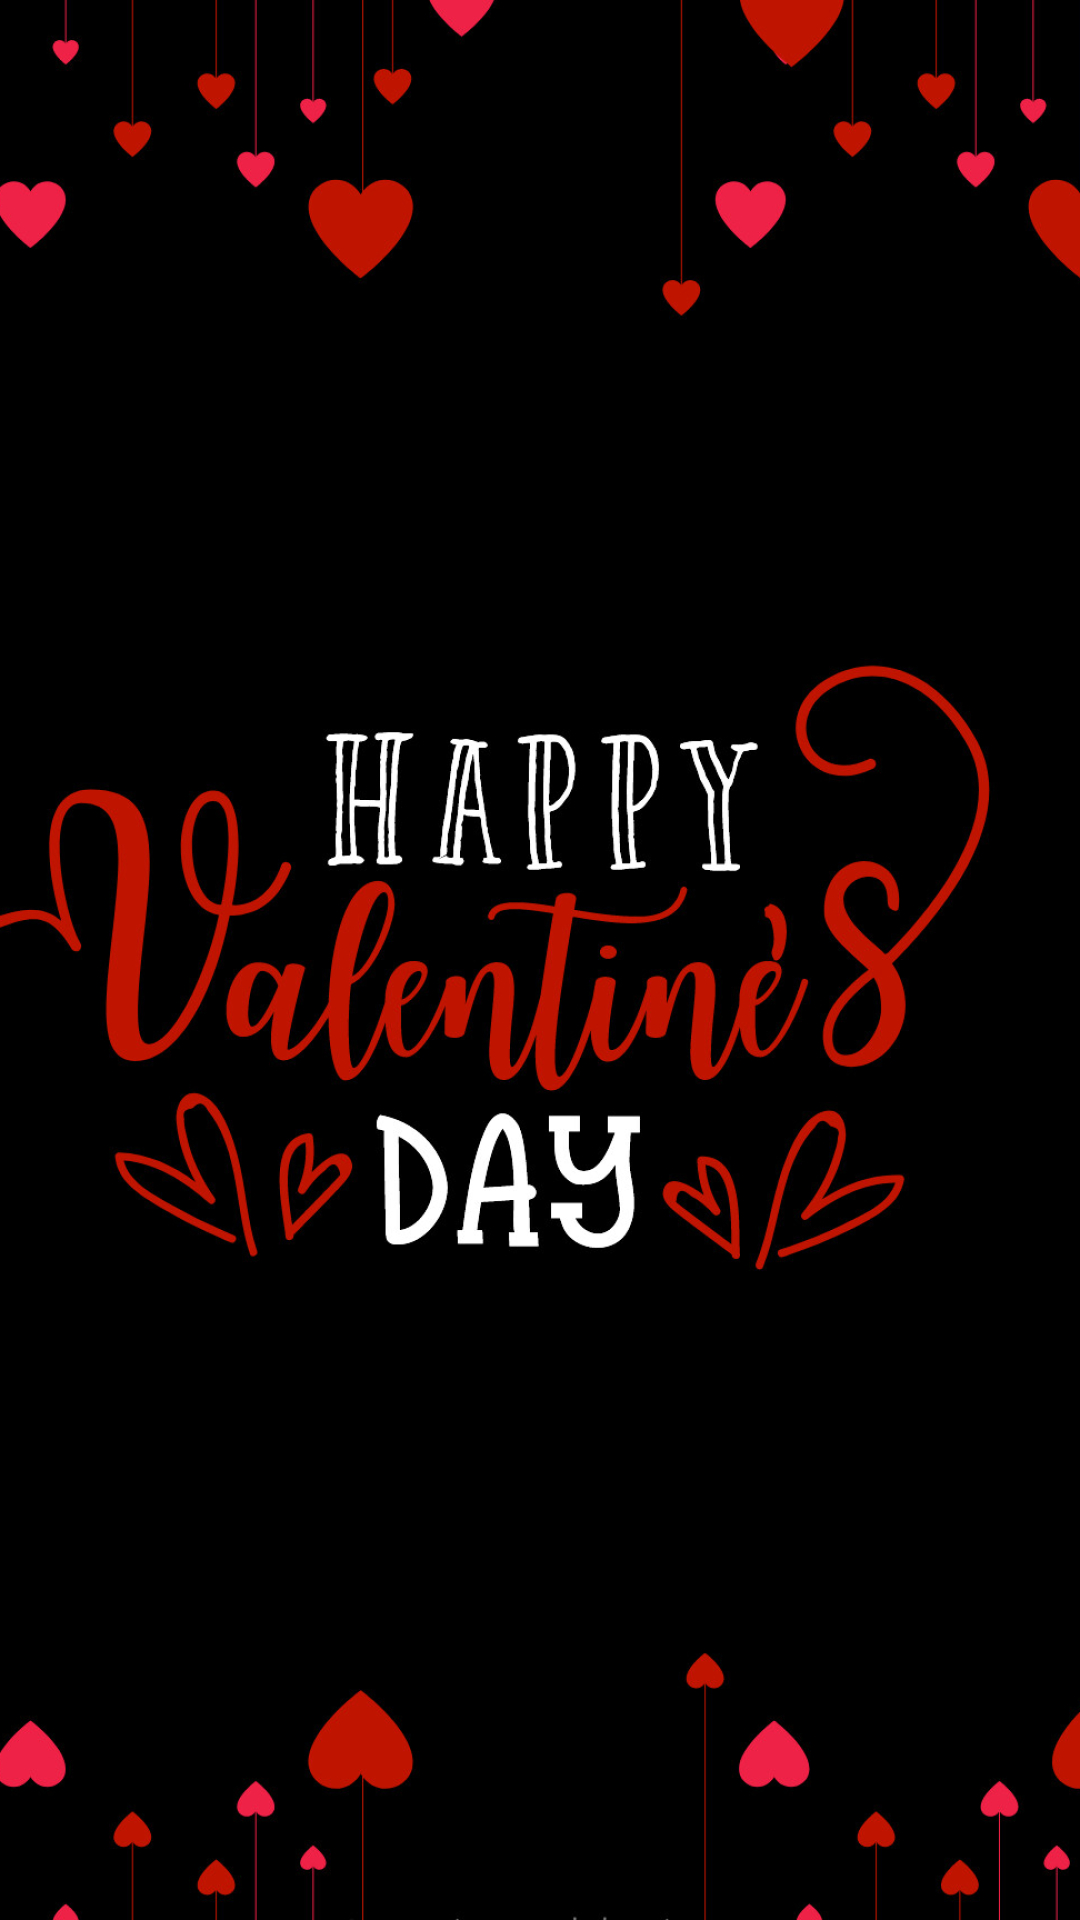 Free valentines day screensavers, Romantic themes, Heartwarming images, Love-filled screens, 1080x1920 Full HD Phone